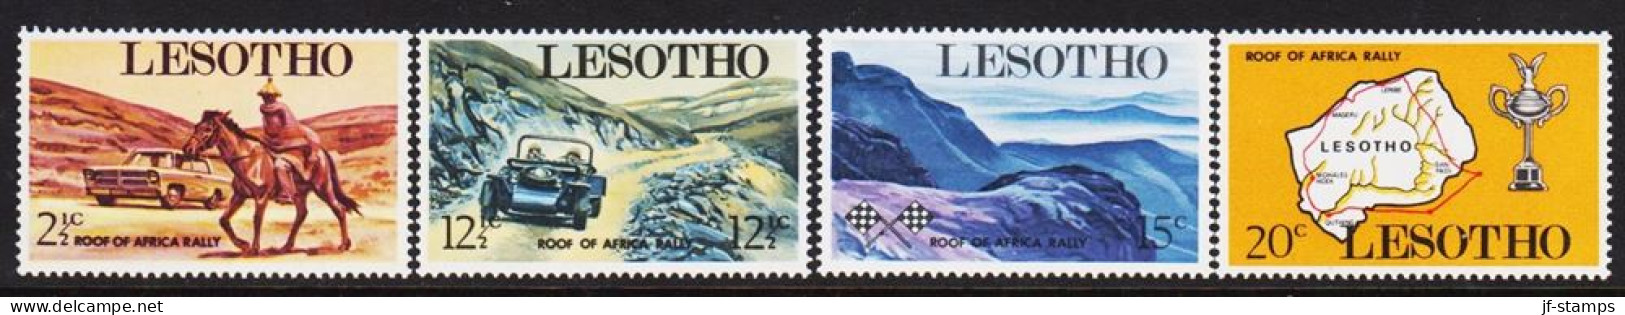 1969. LESOTHO. ROOF OF AFRICA RALLY, Complete Set With 4 Stamps. Never Hinged.  (Michel 71-74) - JF544653 - Lesotho (1966-...)